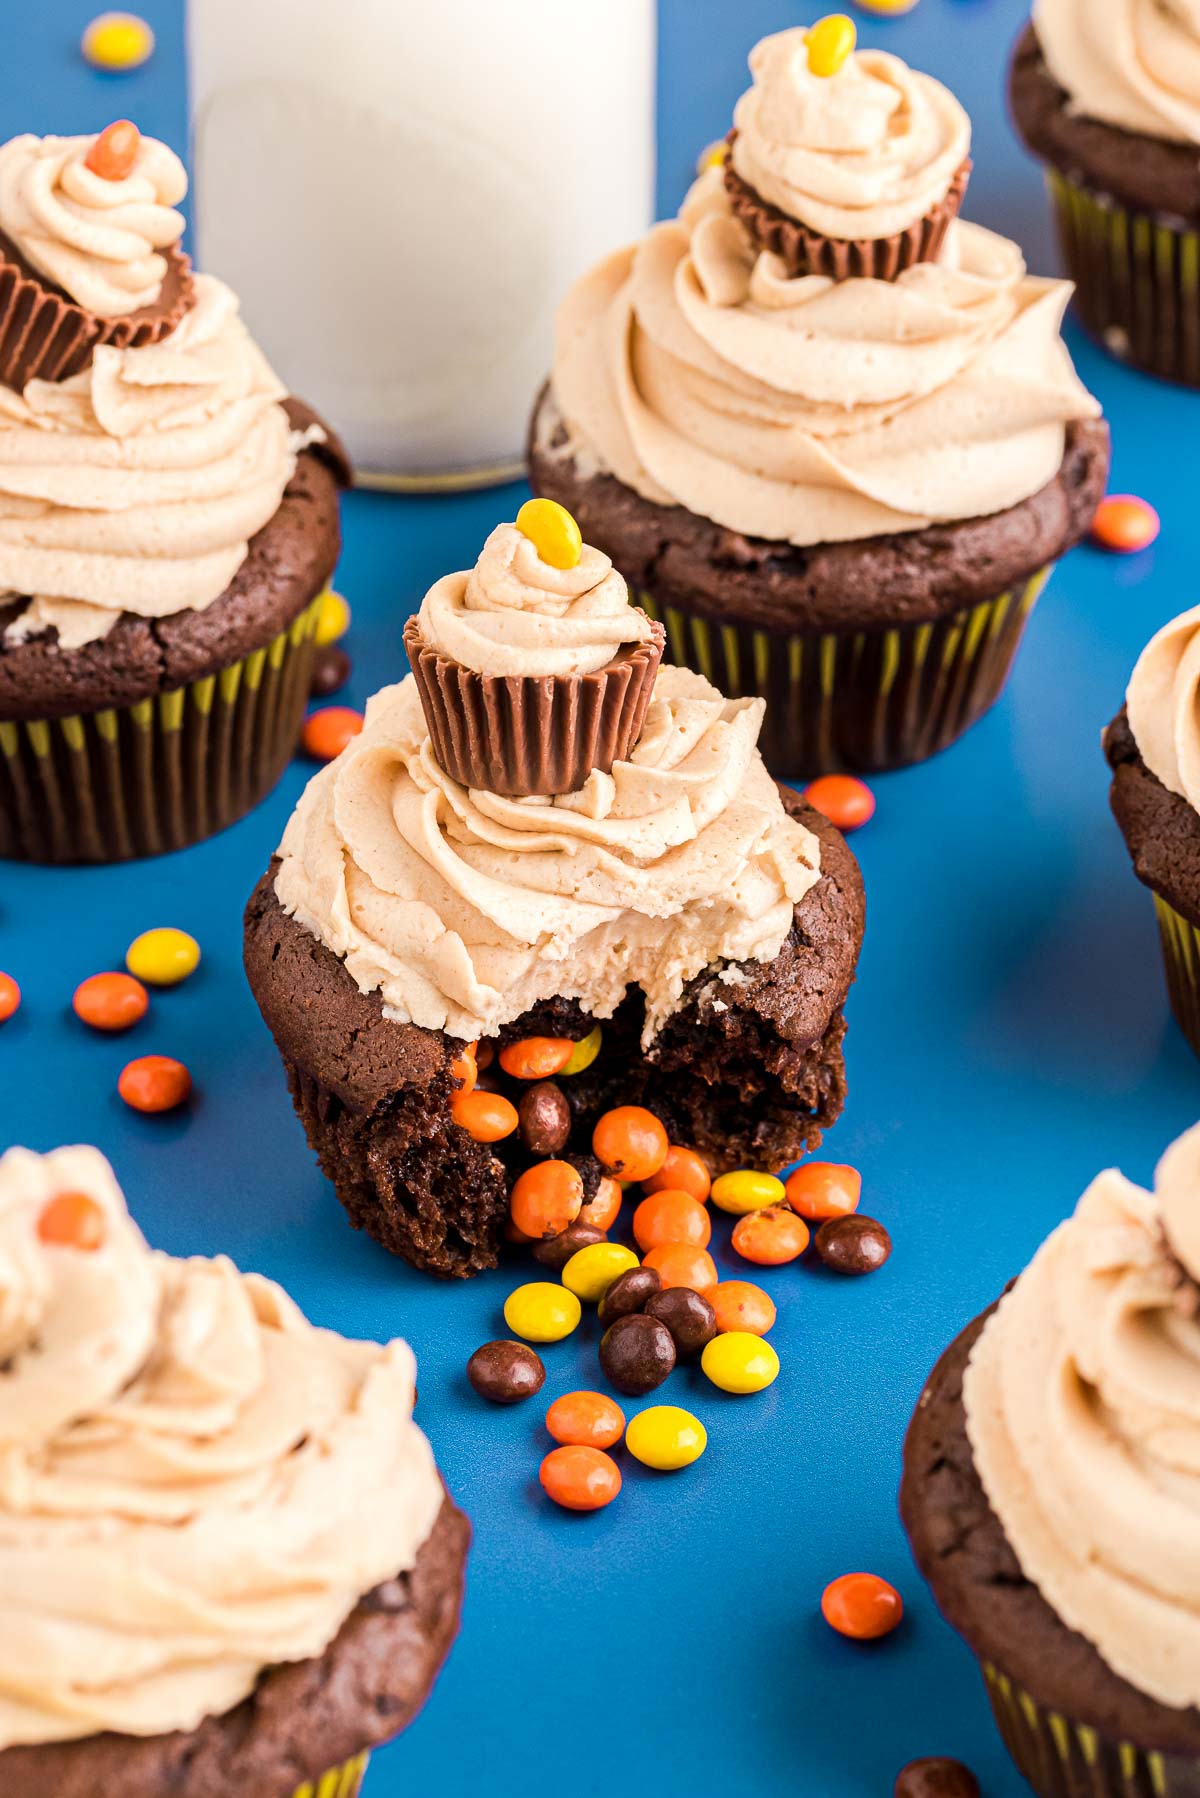 Close up photo of peanut butter chocolate cupcakes on a blue surface with a glass of milk and Reese's pieces scattered around.